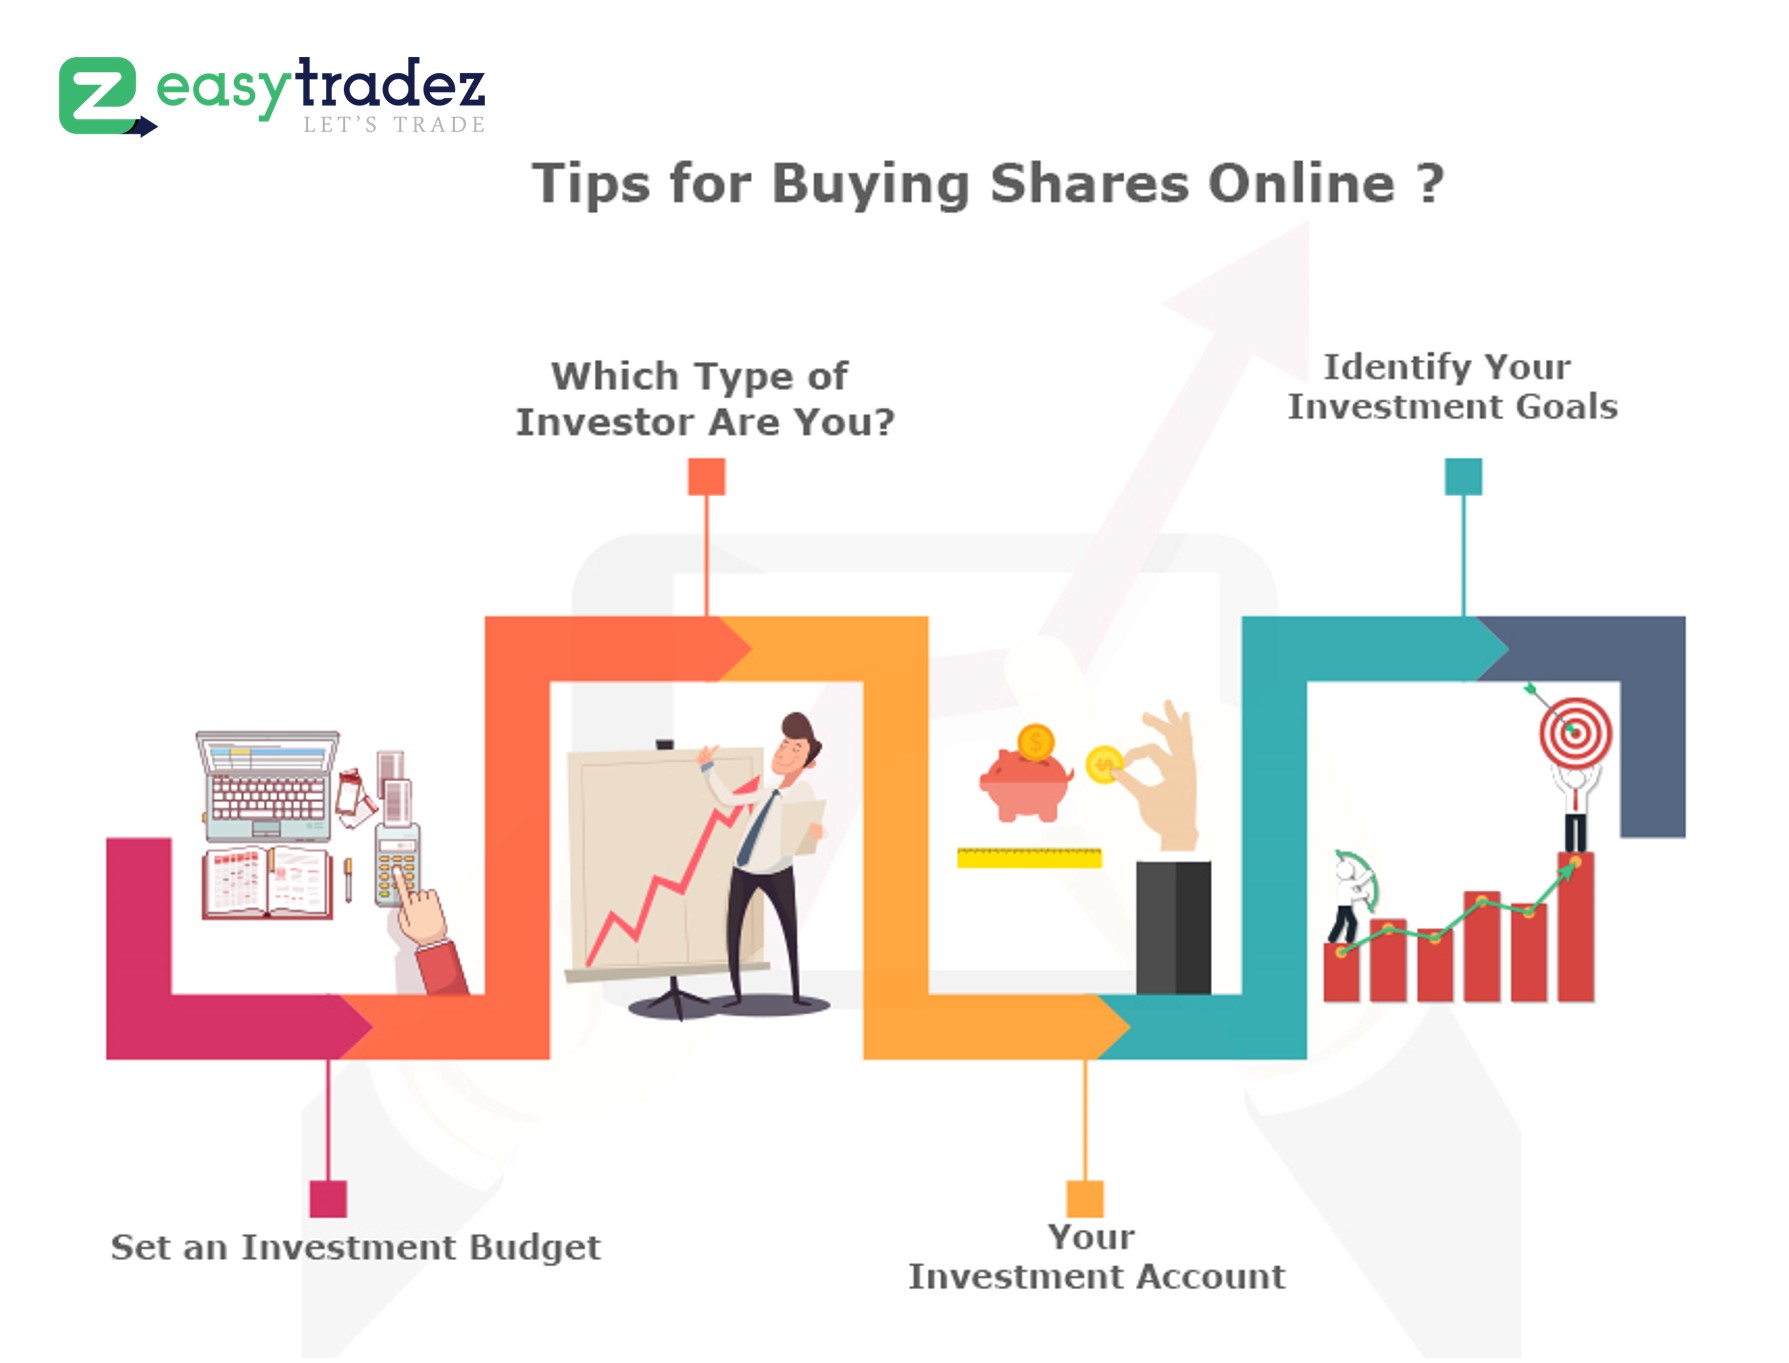 How to Invest in Stocks: Quick Guide on How to Buy Shares Online